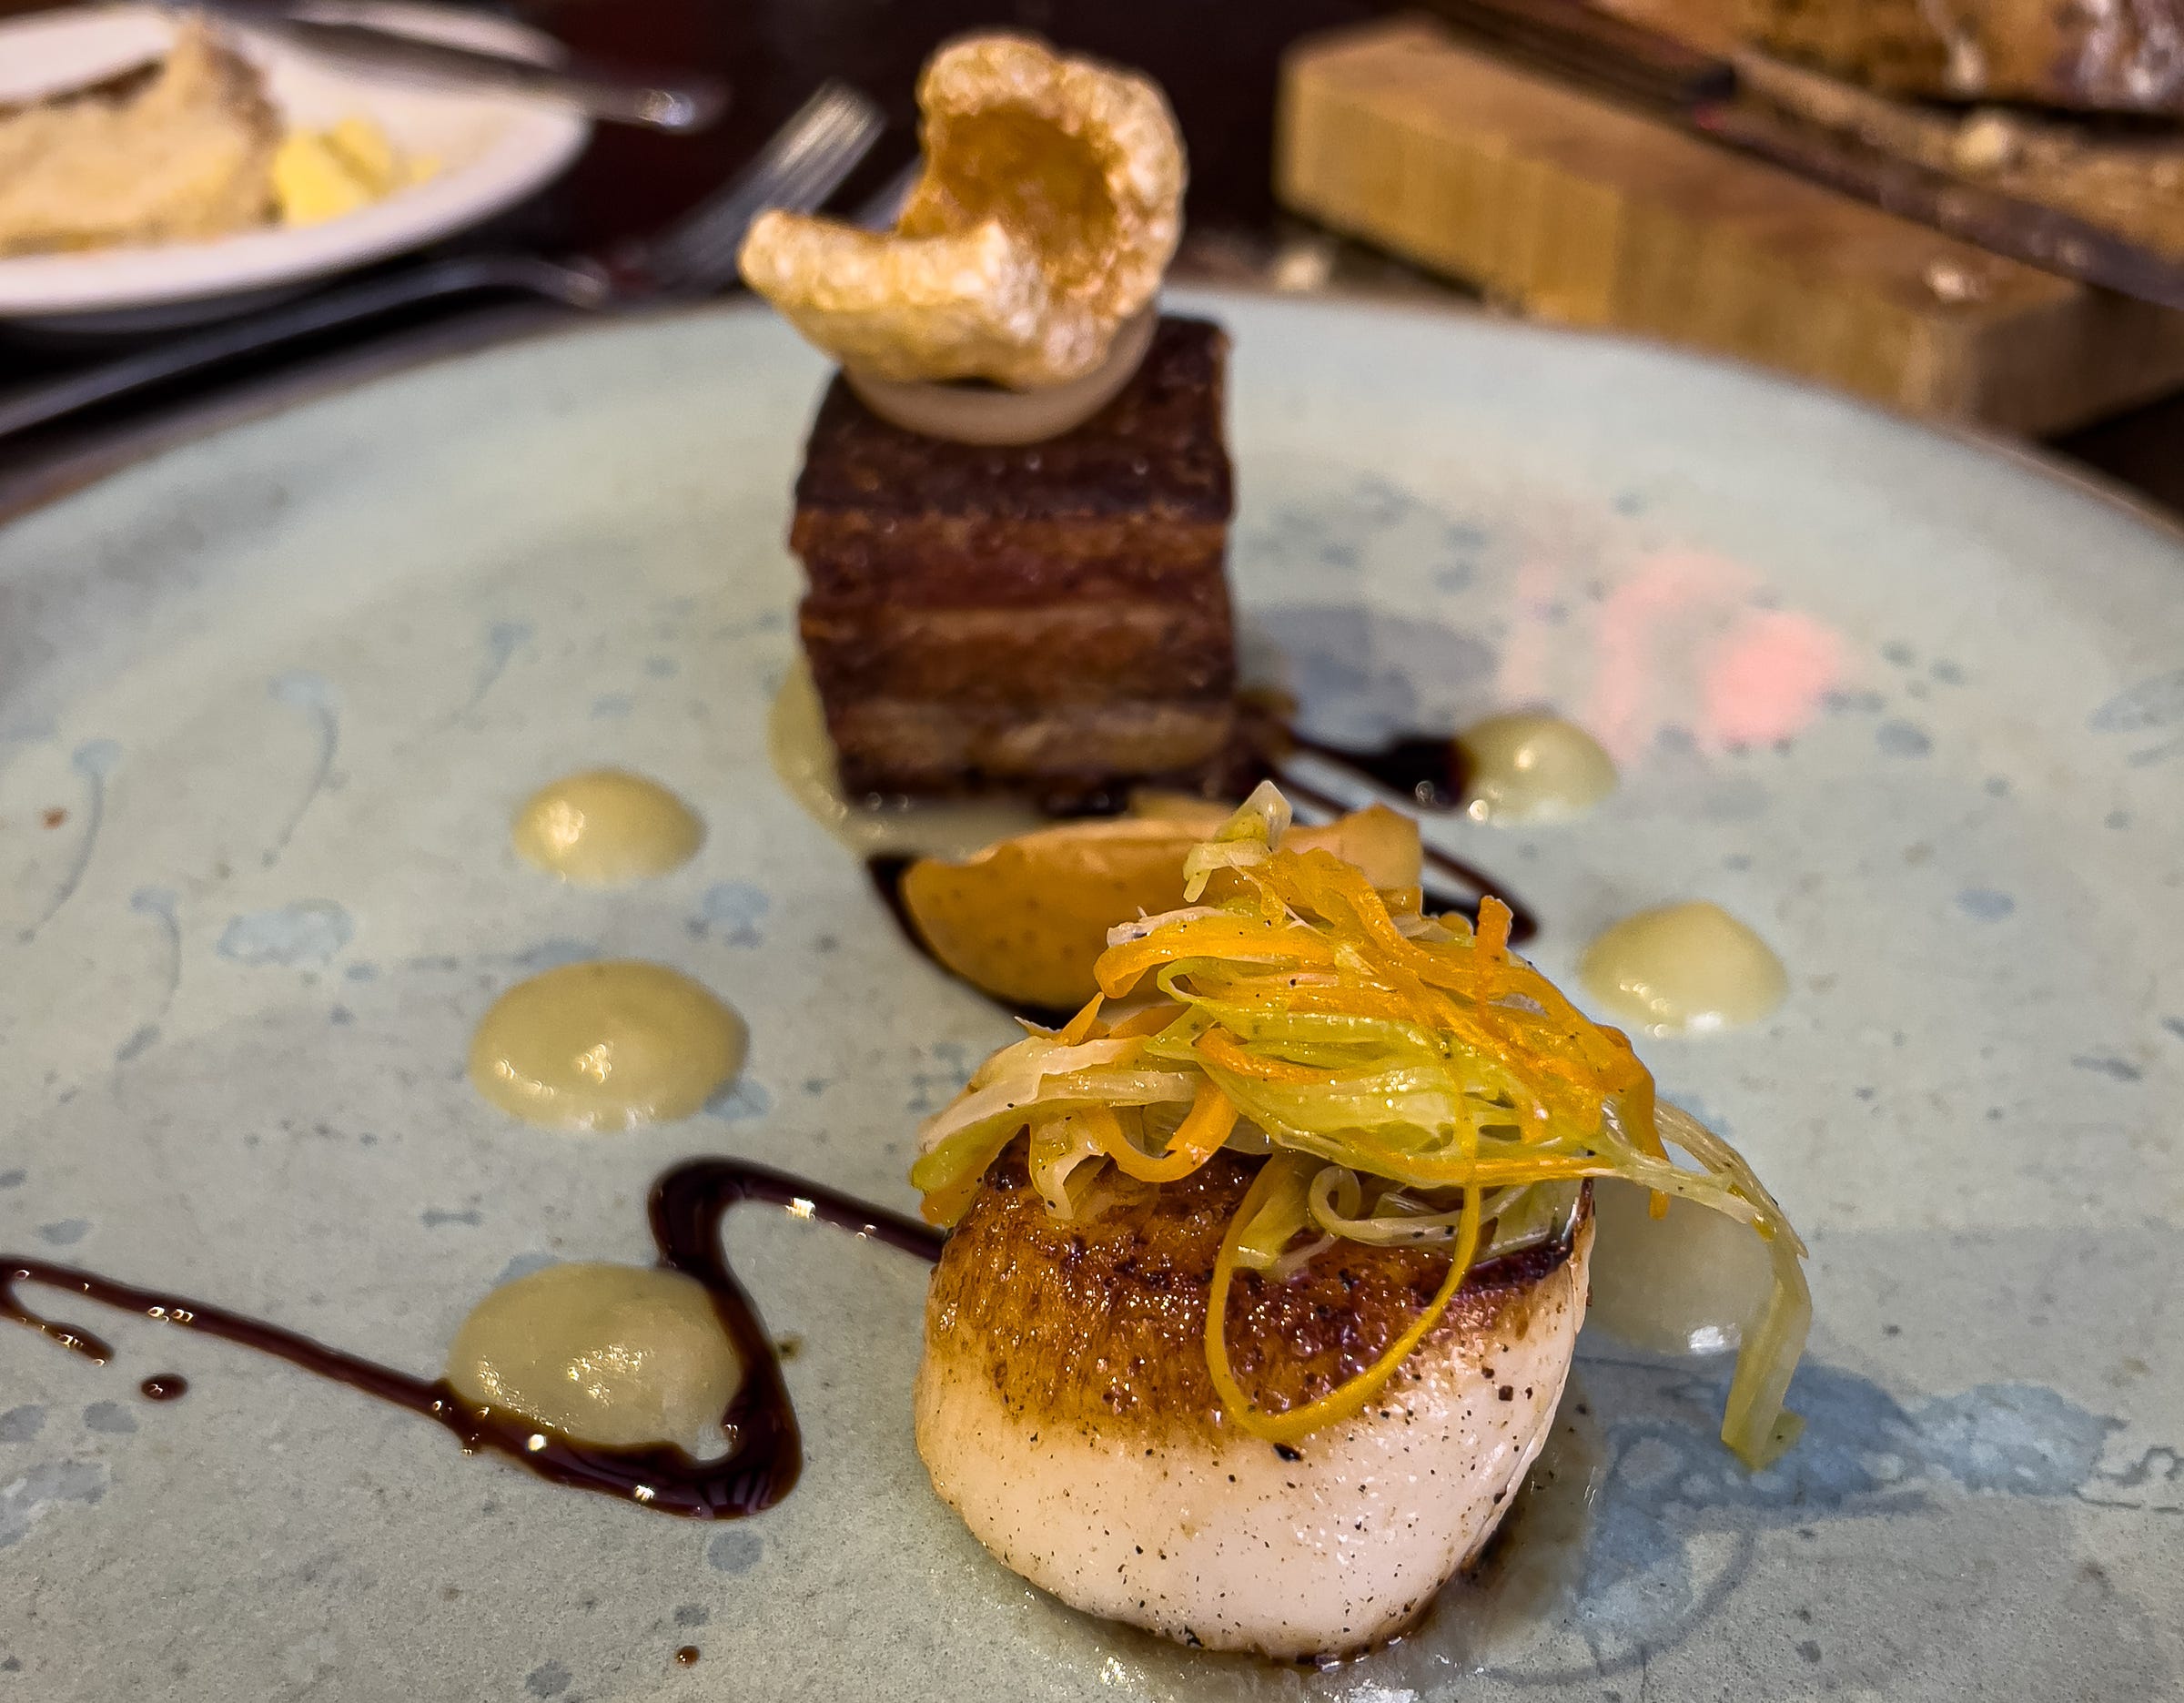 Orkney scallop, old spot belly pork, ginger veg, and poached apple on a plate at the 5 North Street Restaurant in Winchombe, England